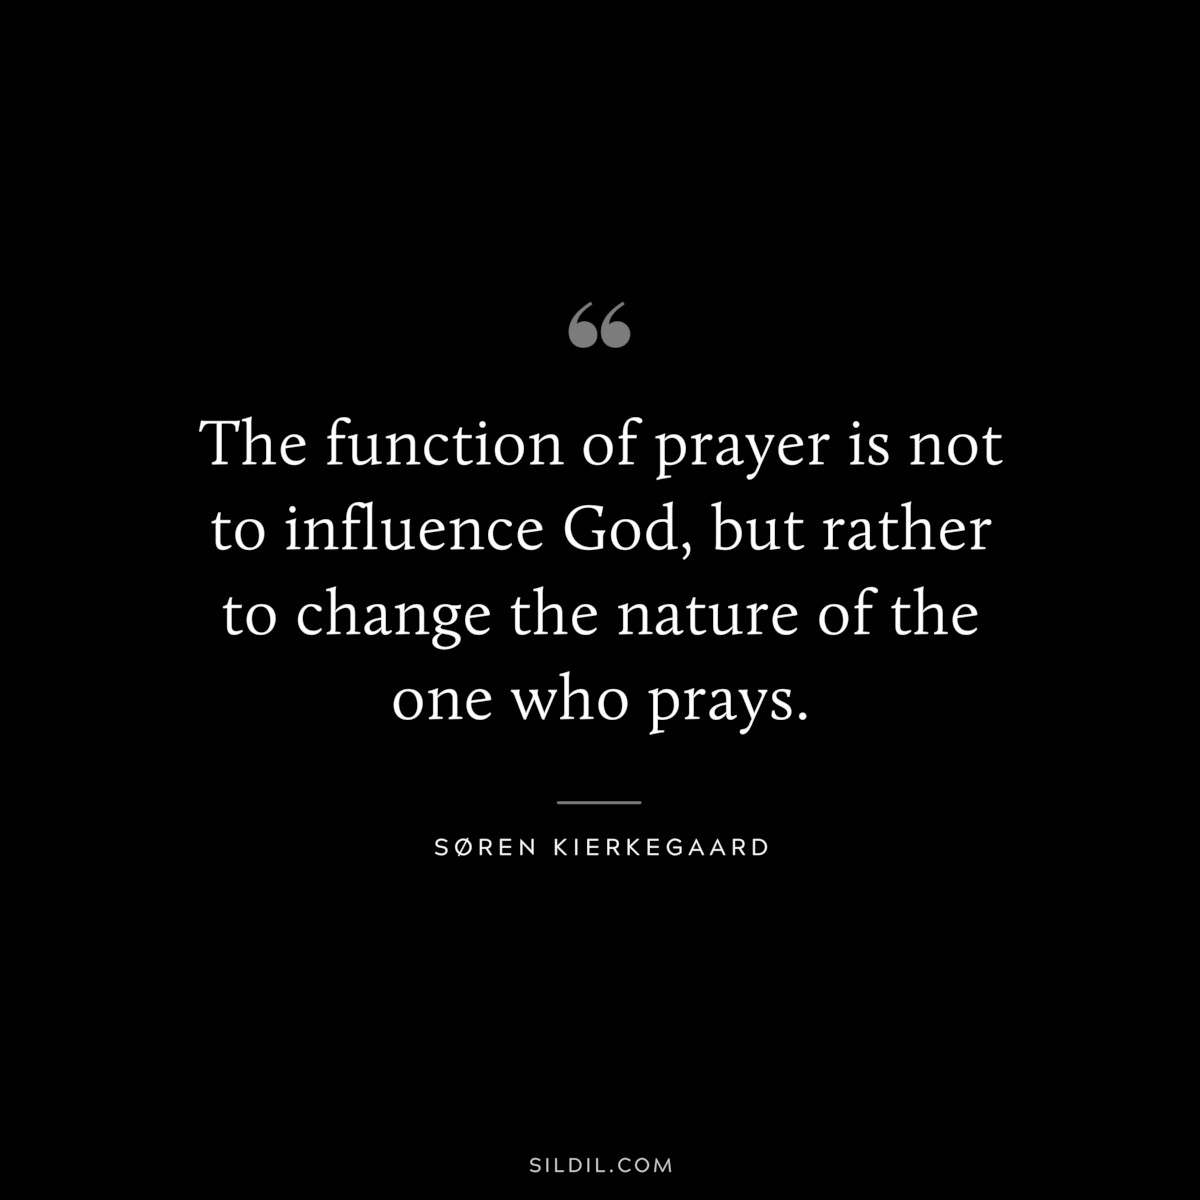 The function of prayer is not to influence God, but rather to change the nature of the one who prays. ― Søren Kierkegaard